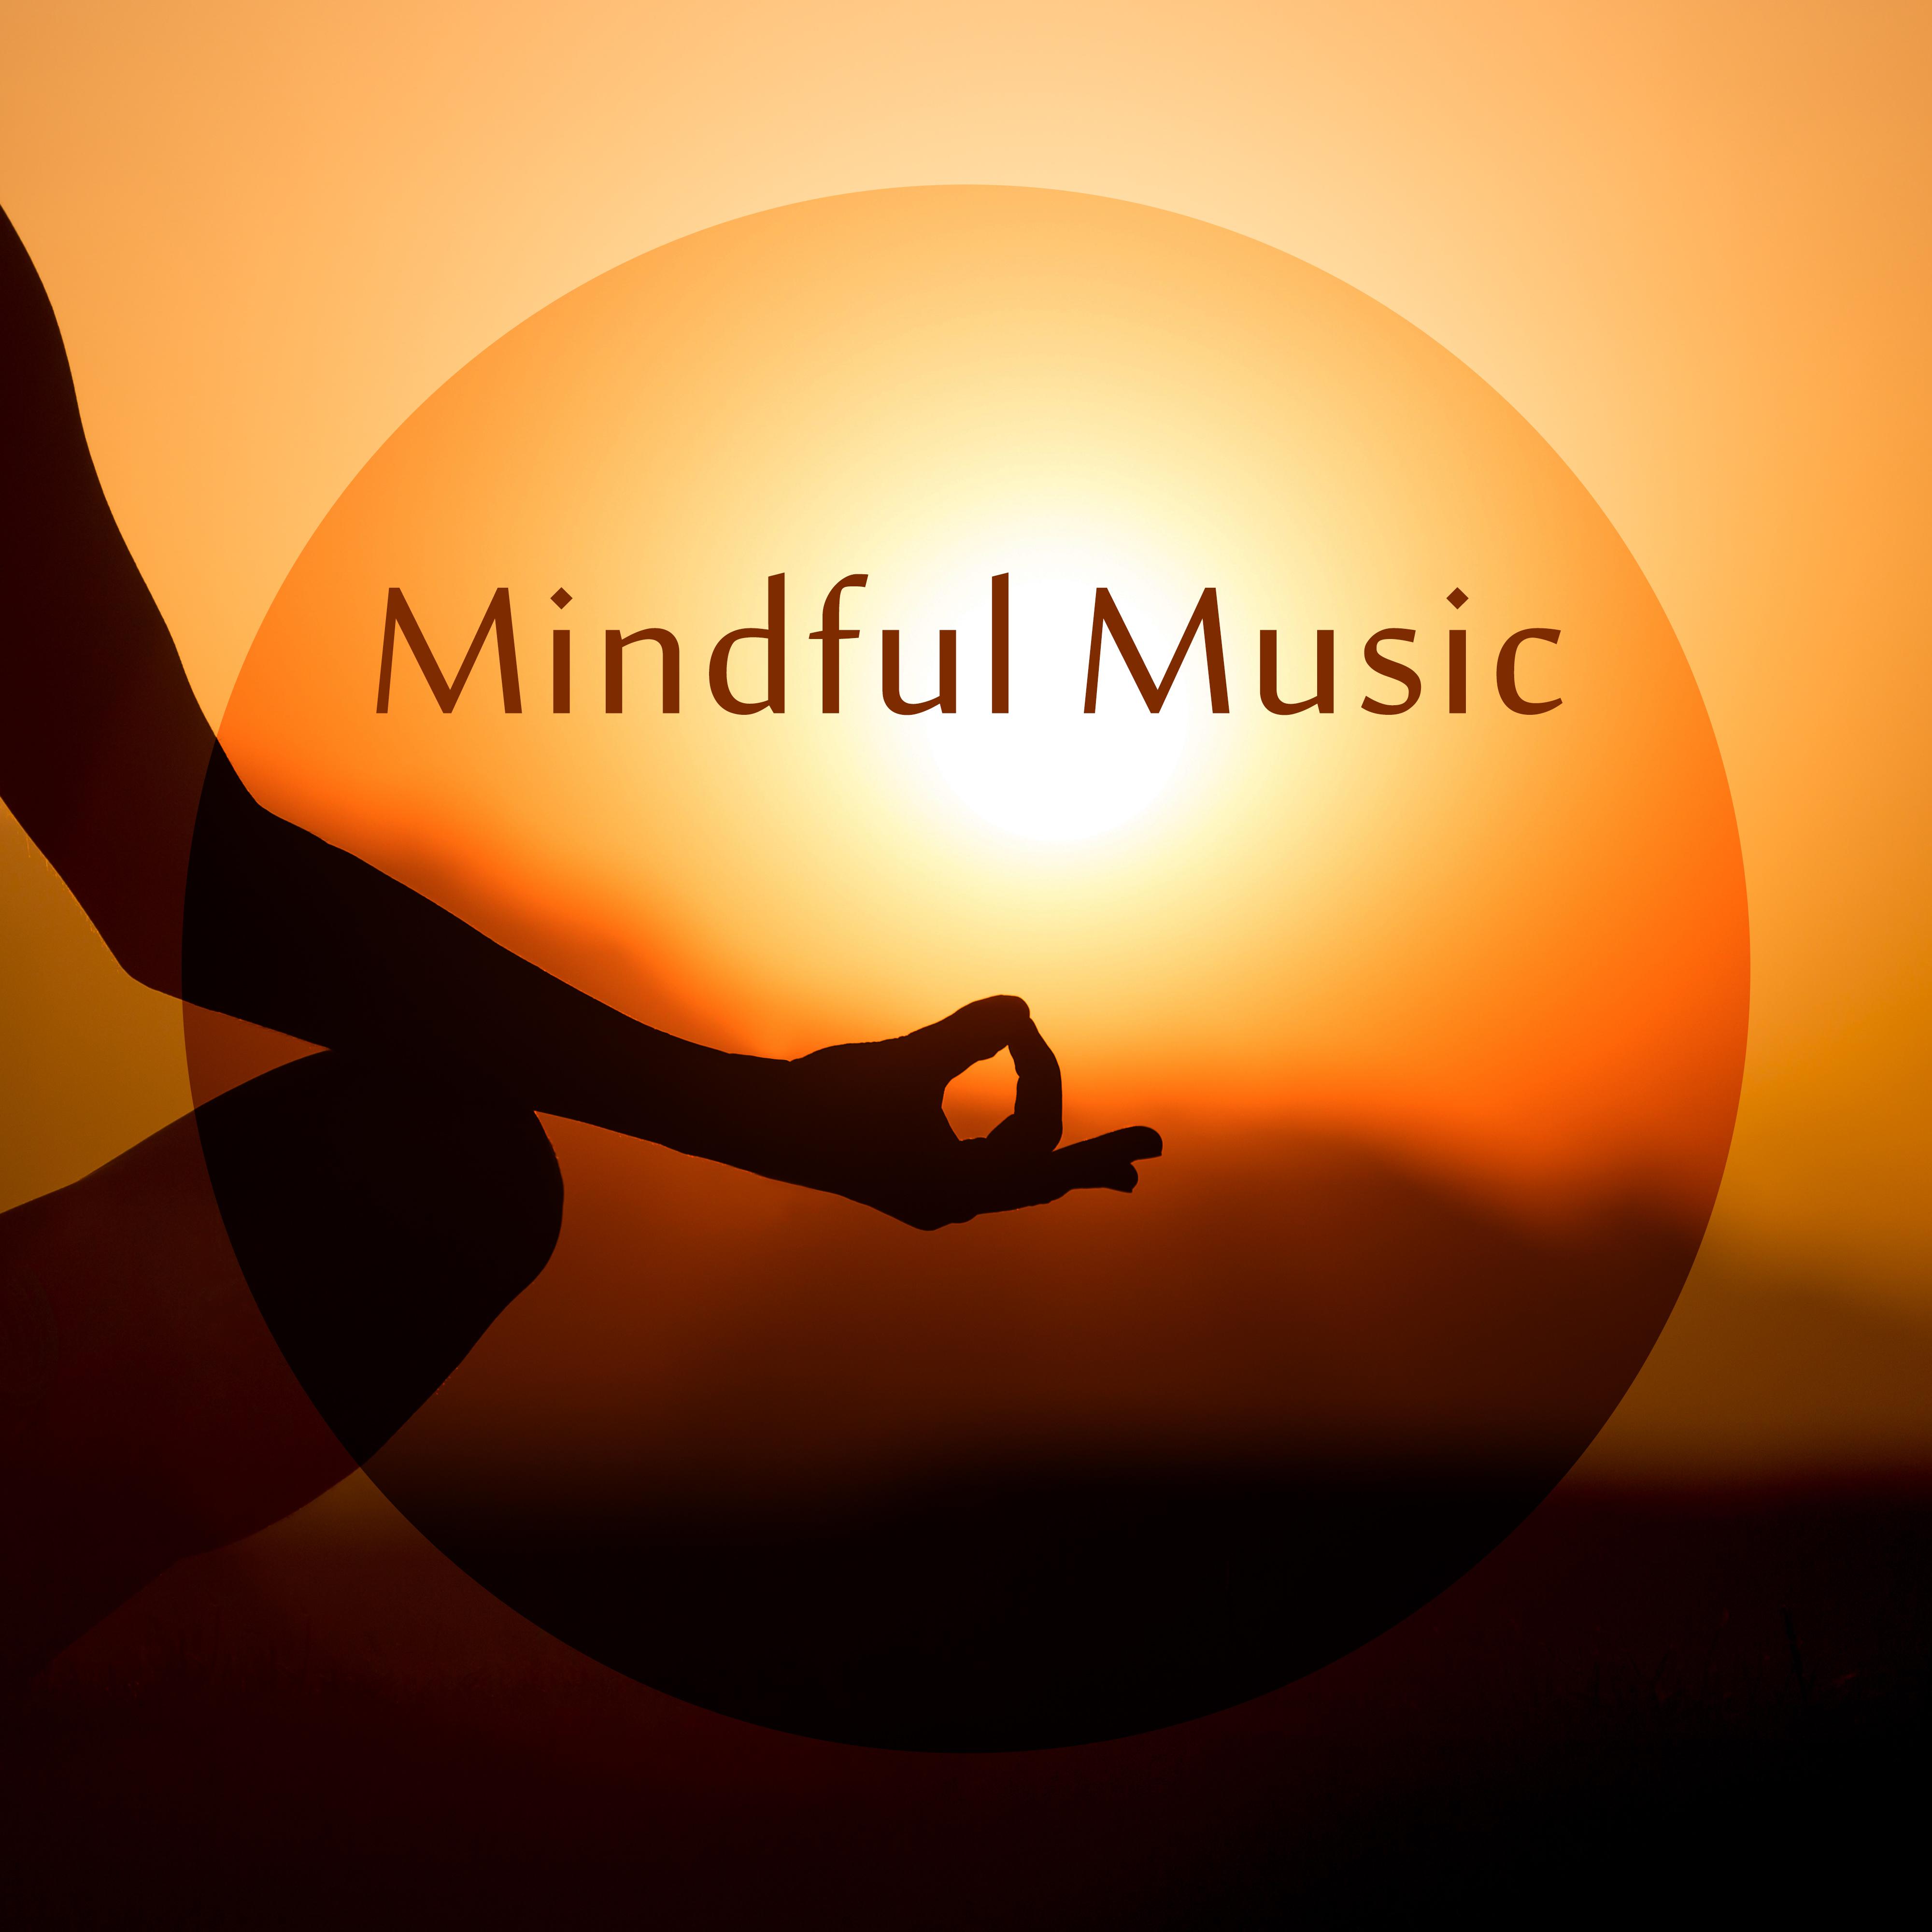 Mindful Music  Meditation Music Zone, Zone for Yoga, Mantra in Meditation, Ambient Yoga, Healing Music to Rest, Pure Mind, Inner Harmony